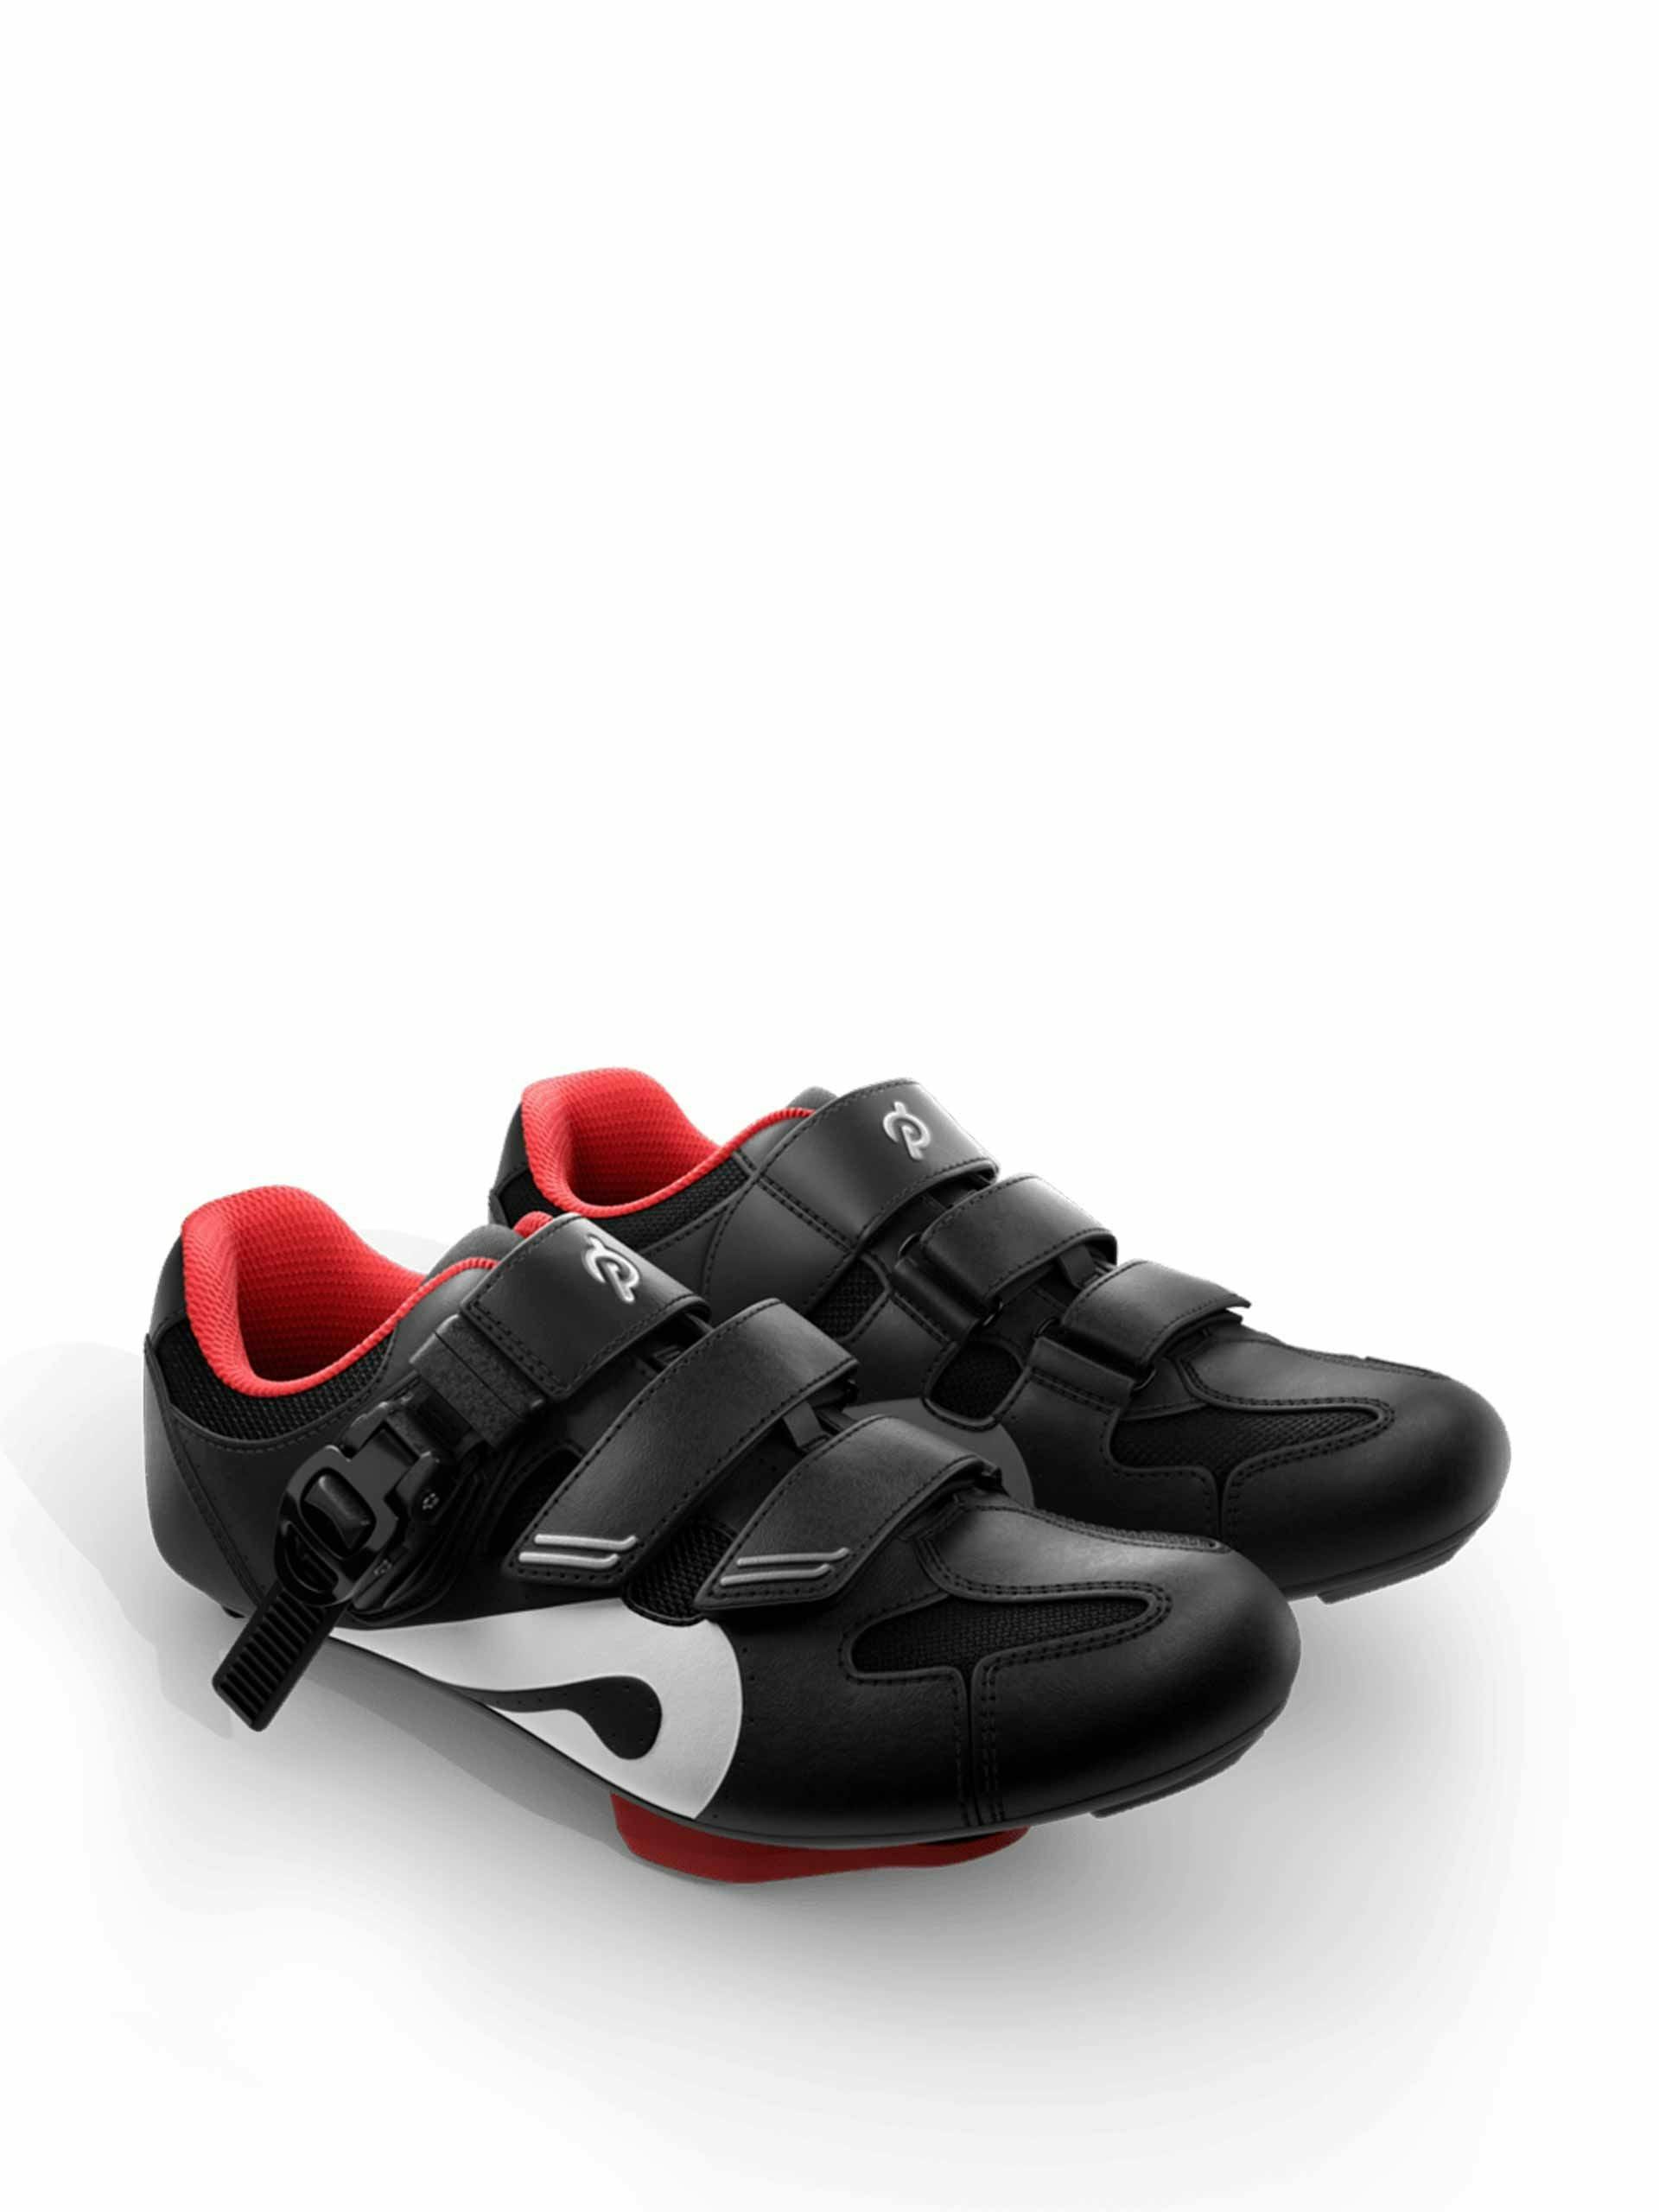 Indoor cycling shoes